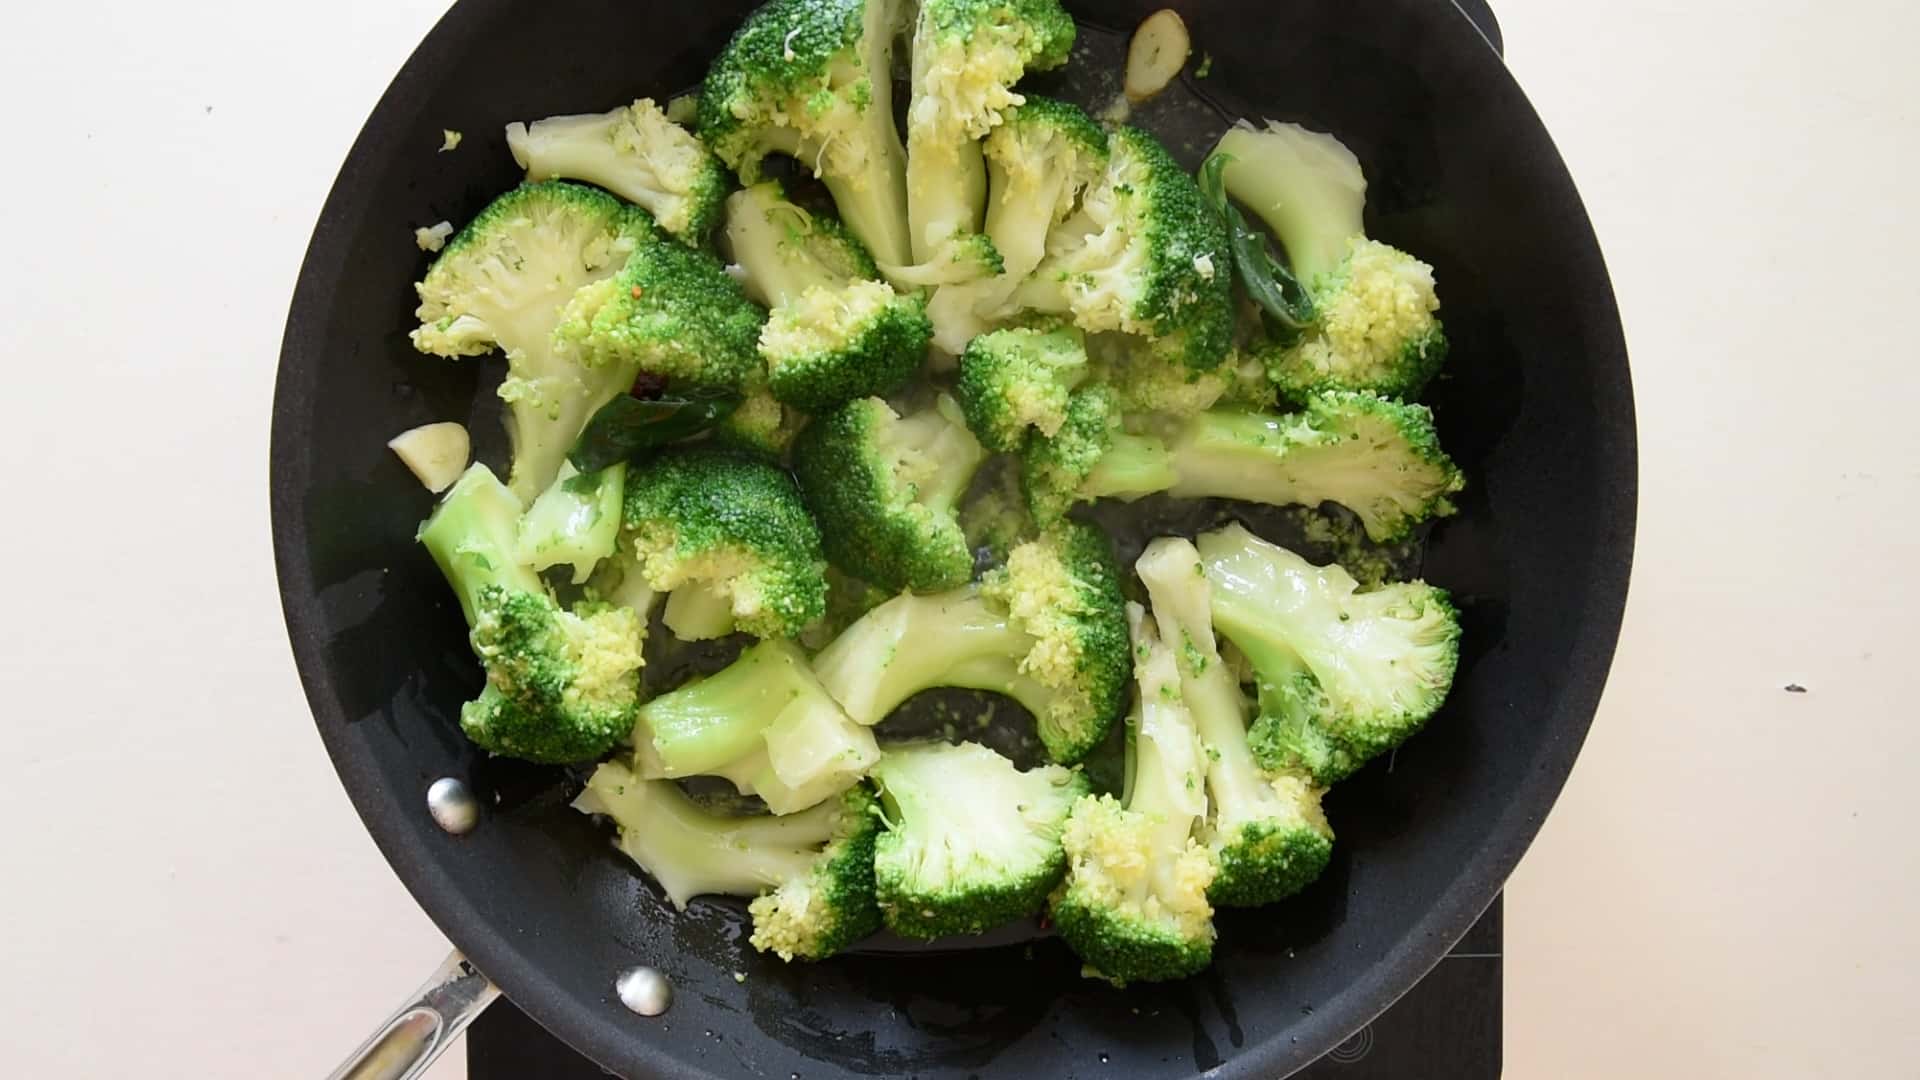 Let the broccoli simmer